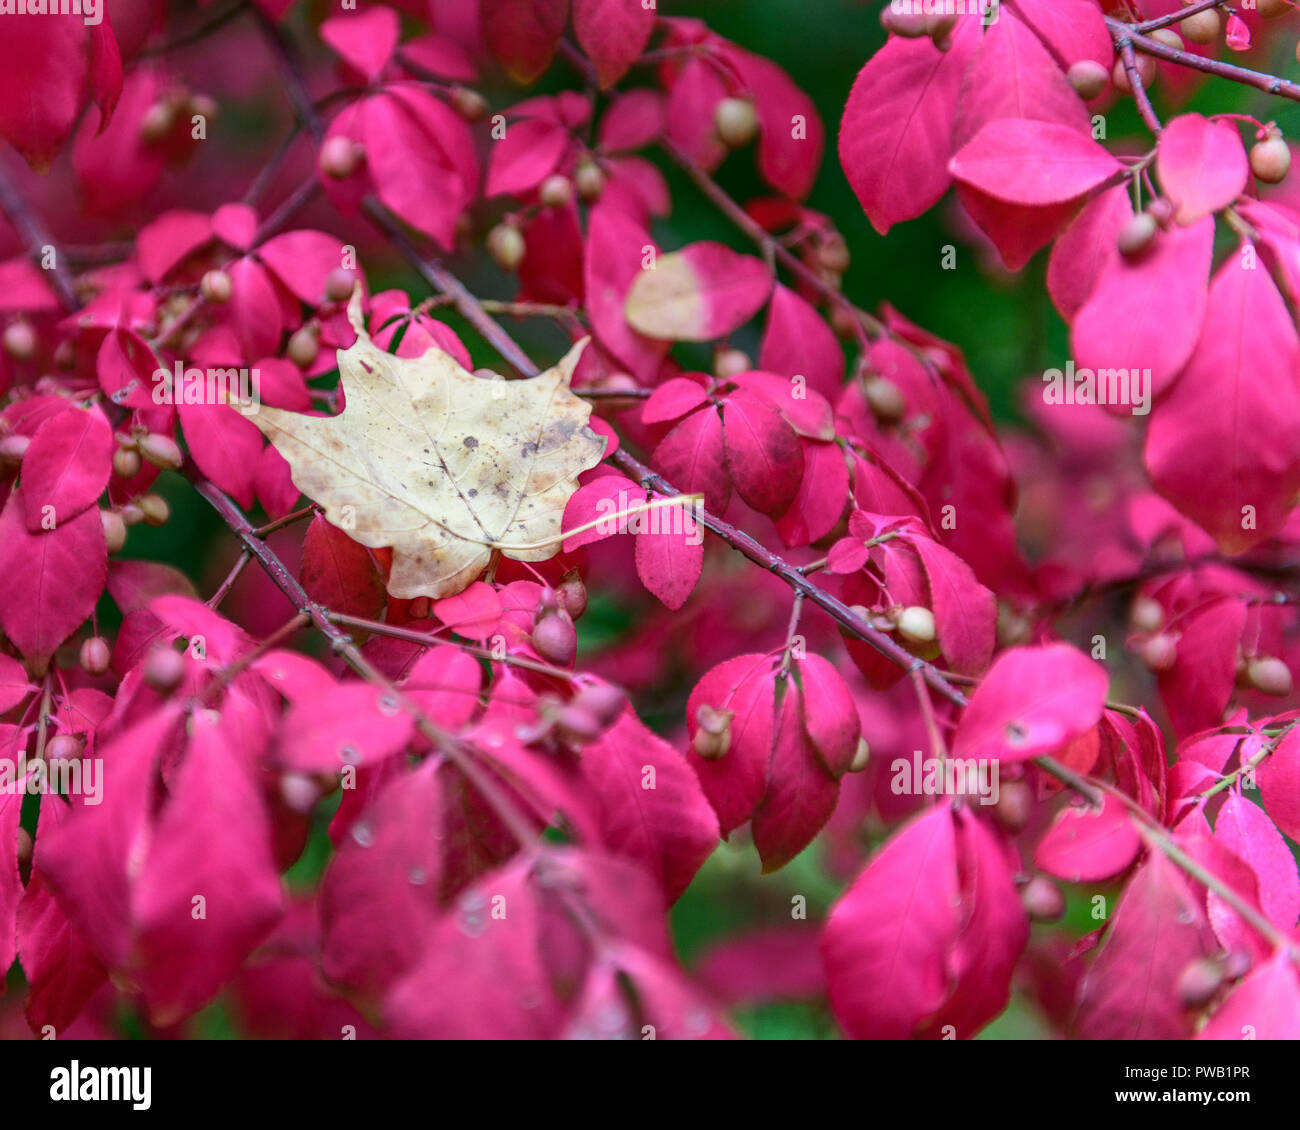 Bright Red Burning Bush (Euonymus Alatus) With Dead Brown Maple Leaf Resting In The Middle Stock Photo